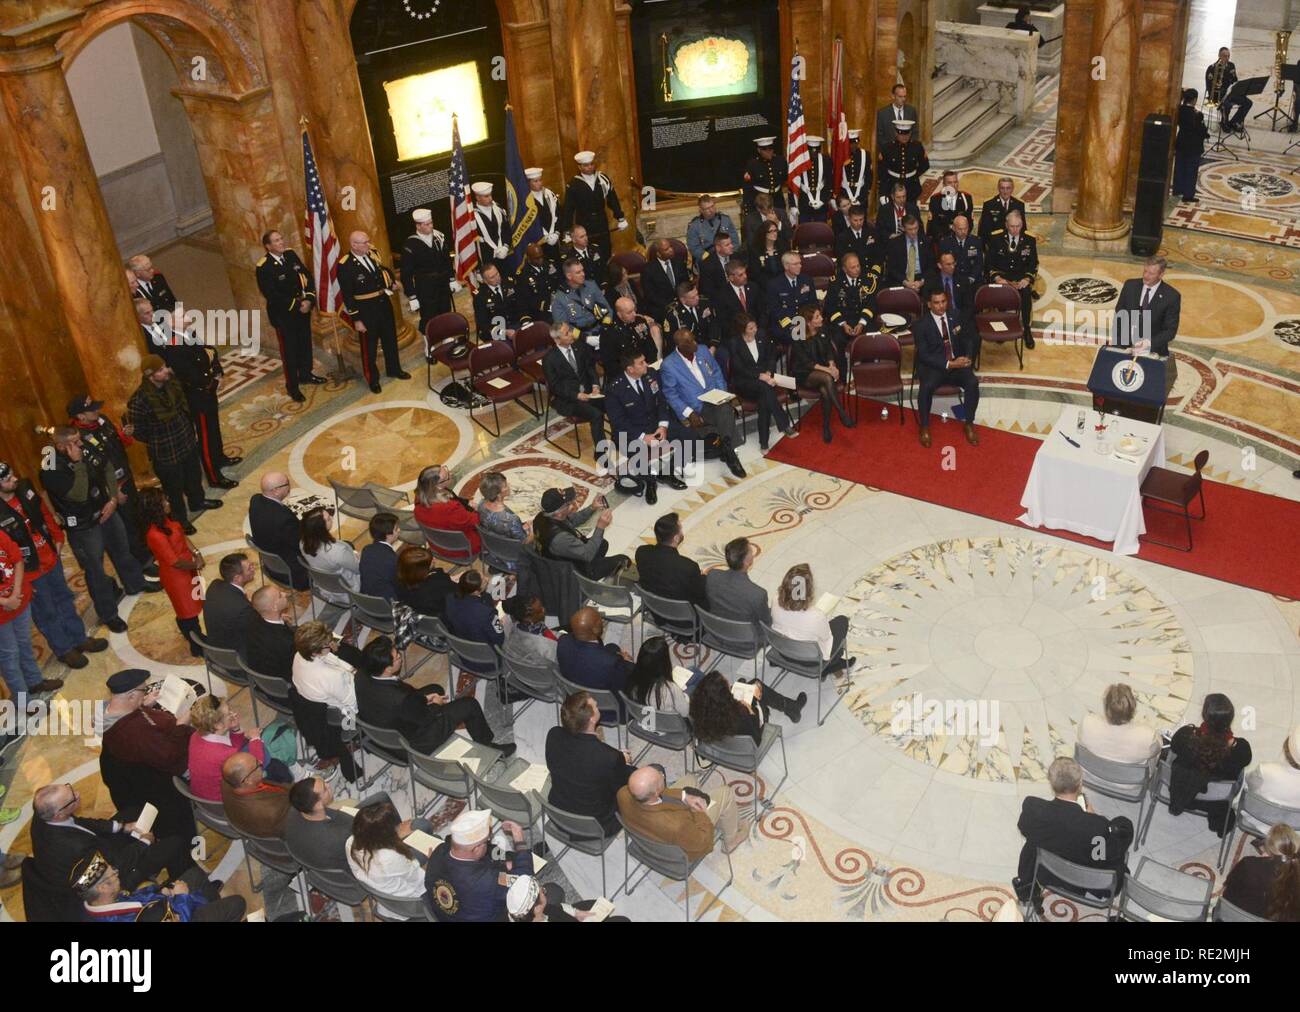 BOSTON (Nov. 11, 2016) Governor of Massachusetts, Charlie Baker, addresses Veterans during a Veterans' day ceremony at the Massachusetts State House. The crew of USS Constitution participated in various events hosted by The Commonwealth of Massachusetts to honor those who have served in the armed forces of the United States of America. Stock Photo